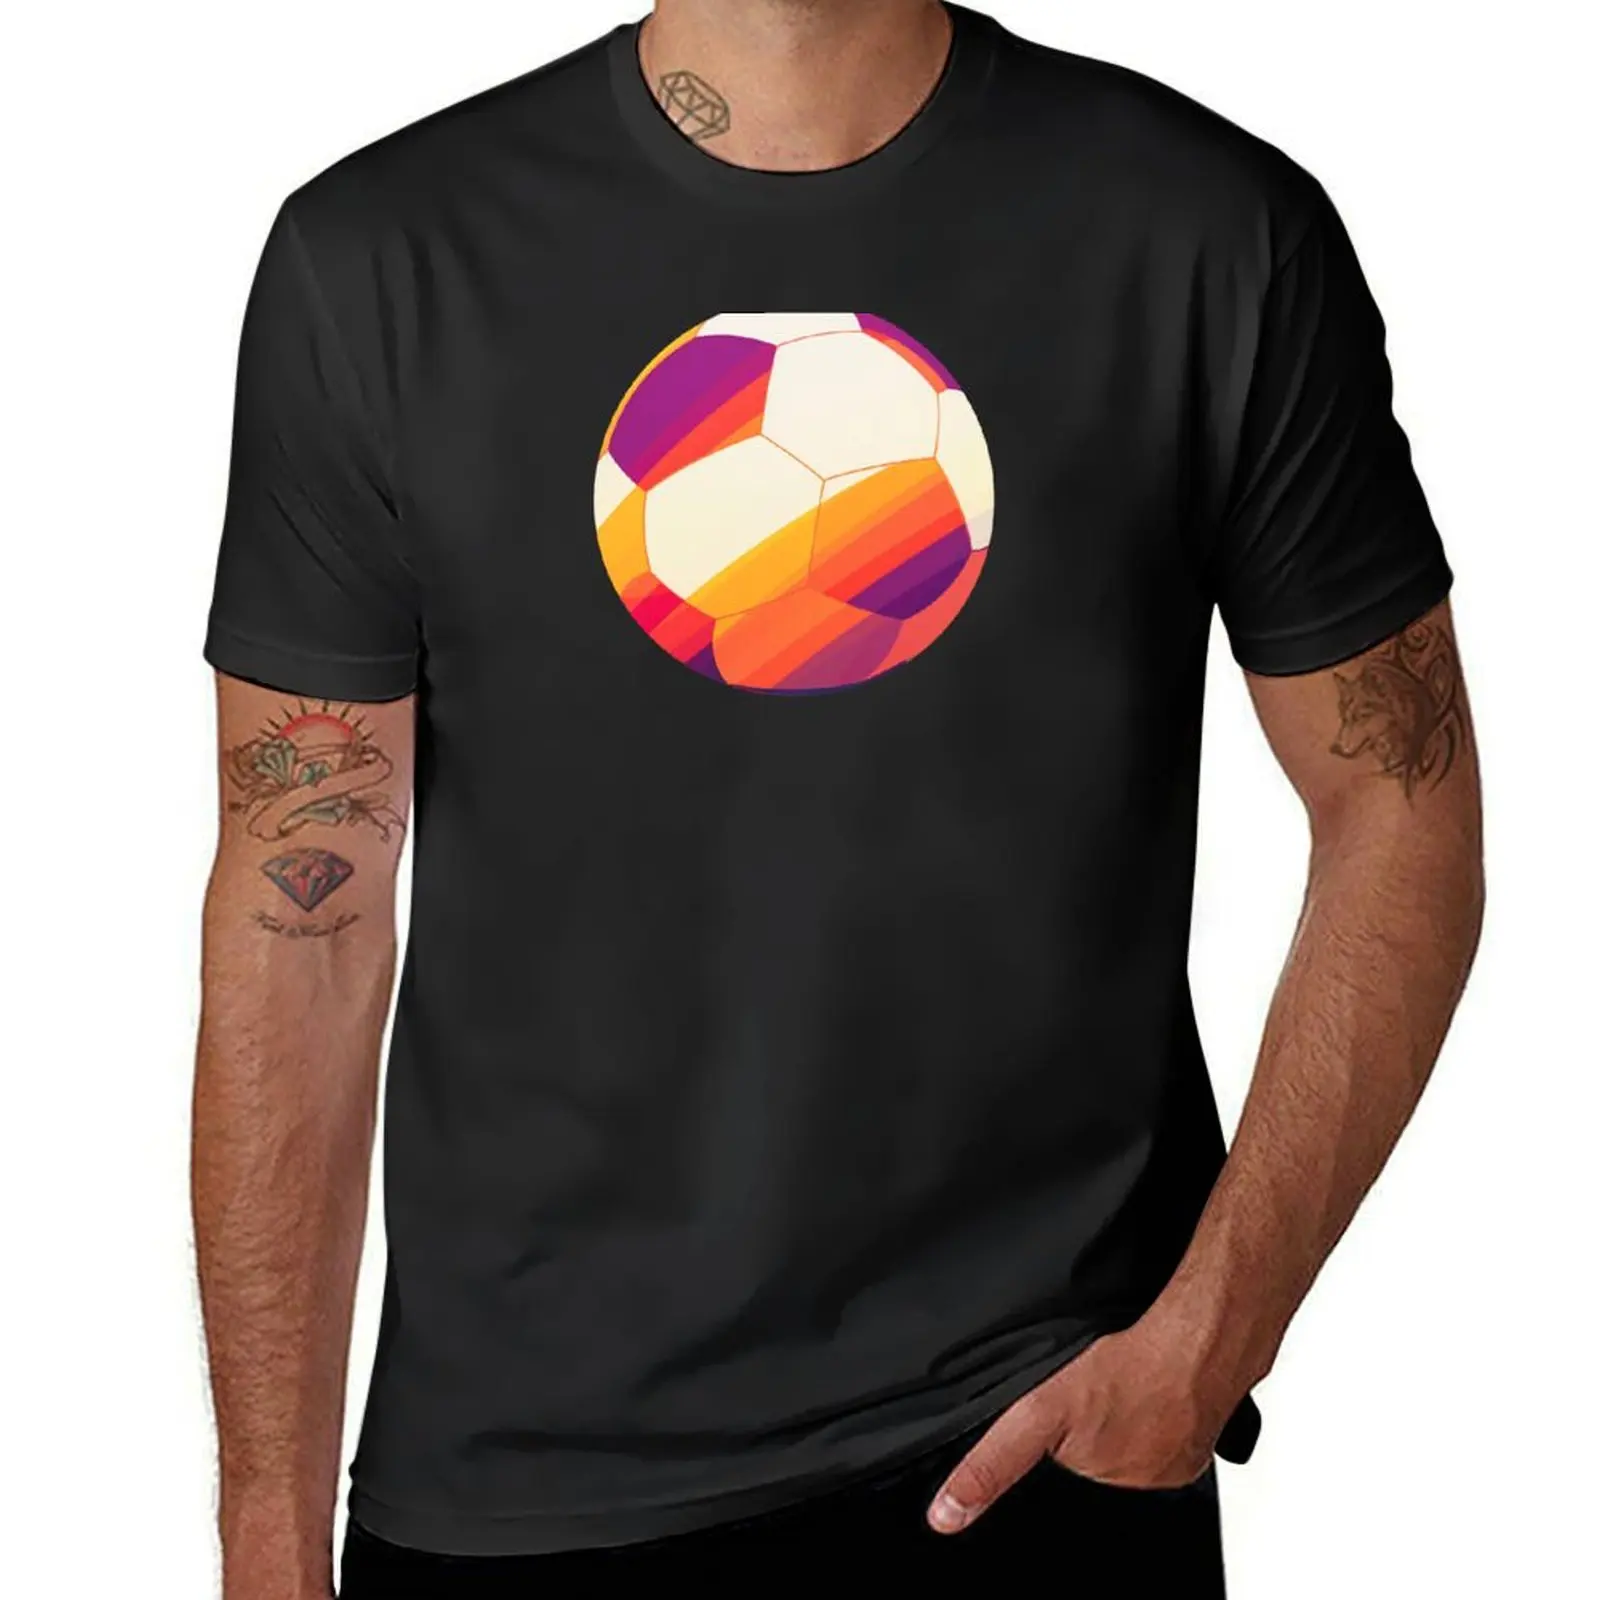 

Soccer Ball T-shirt oversizeds Aesthetic clothing summer tops mens graphic t-shirts hip hop